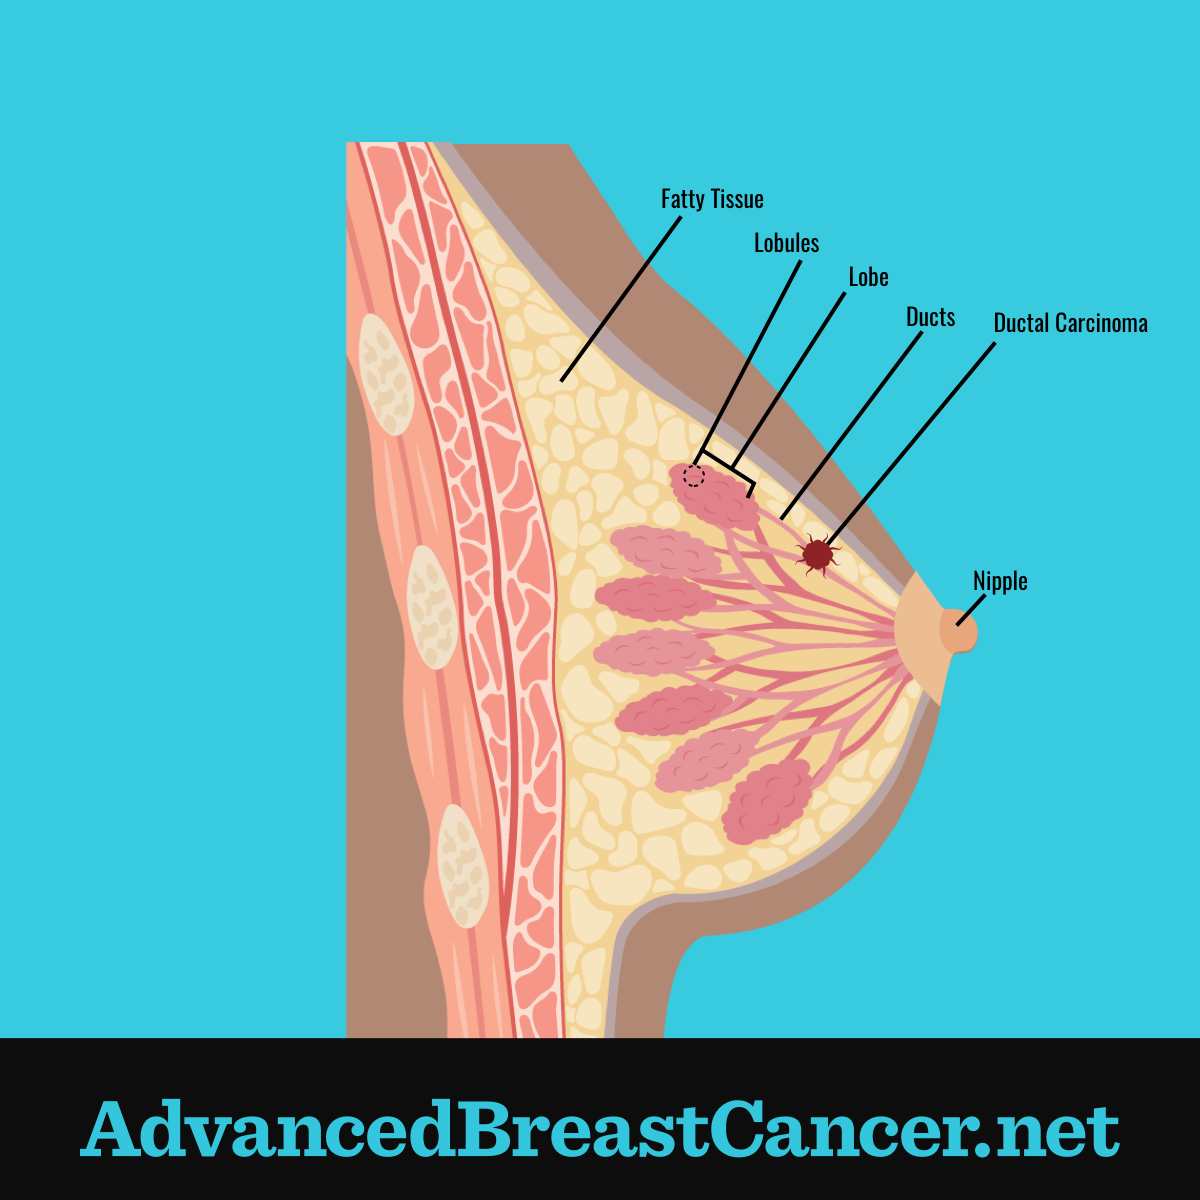 What Are the Different Types of Breast Cancer?